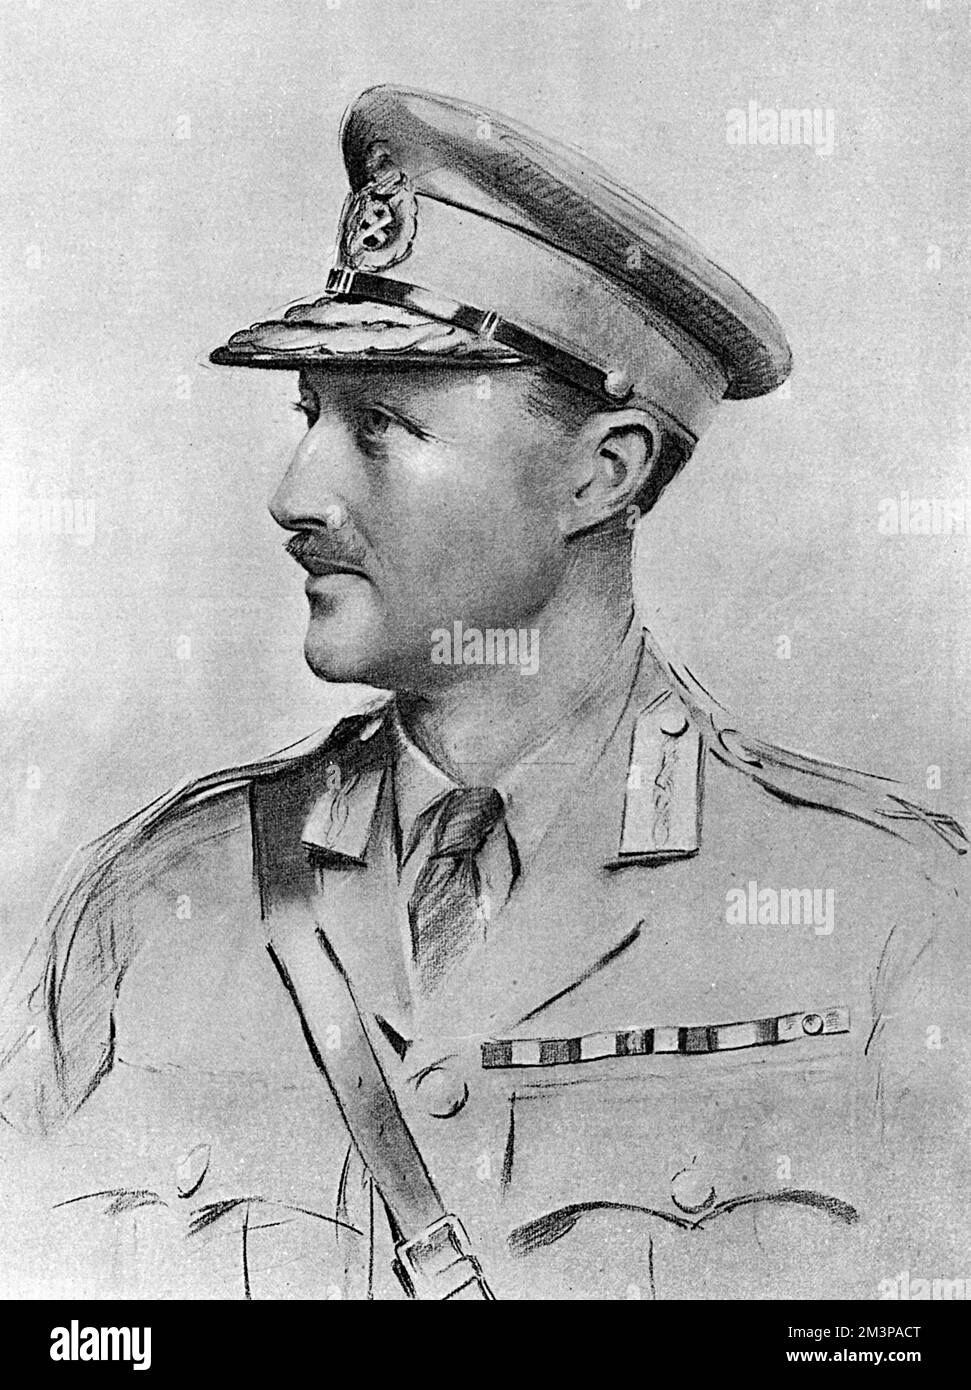 Brigadier-General Frank Ramsay, D.S.O., C.M.G, son of Brigadier-General W. H. Ramsay of the Queen's Own Hussars.  Began his military career in the Middlesex Regiment in 1897.  Became aide-de-camp to Sir Arthur Havelock, Governor of Madras in 1898.  Saw active service in the Boer War.  Served with the Royal Flying Corps in the early part of the First World War and later commanded a battalion of the King's Liverpool Regiment at the Battle of Loos.  In command of a brigade of the Irish Division and was the youngest general in the army when appointed to that rank.      Date: 1918 Stock Photo